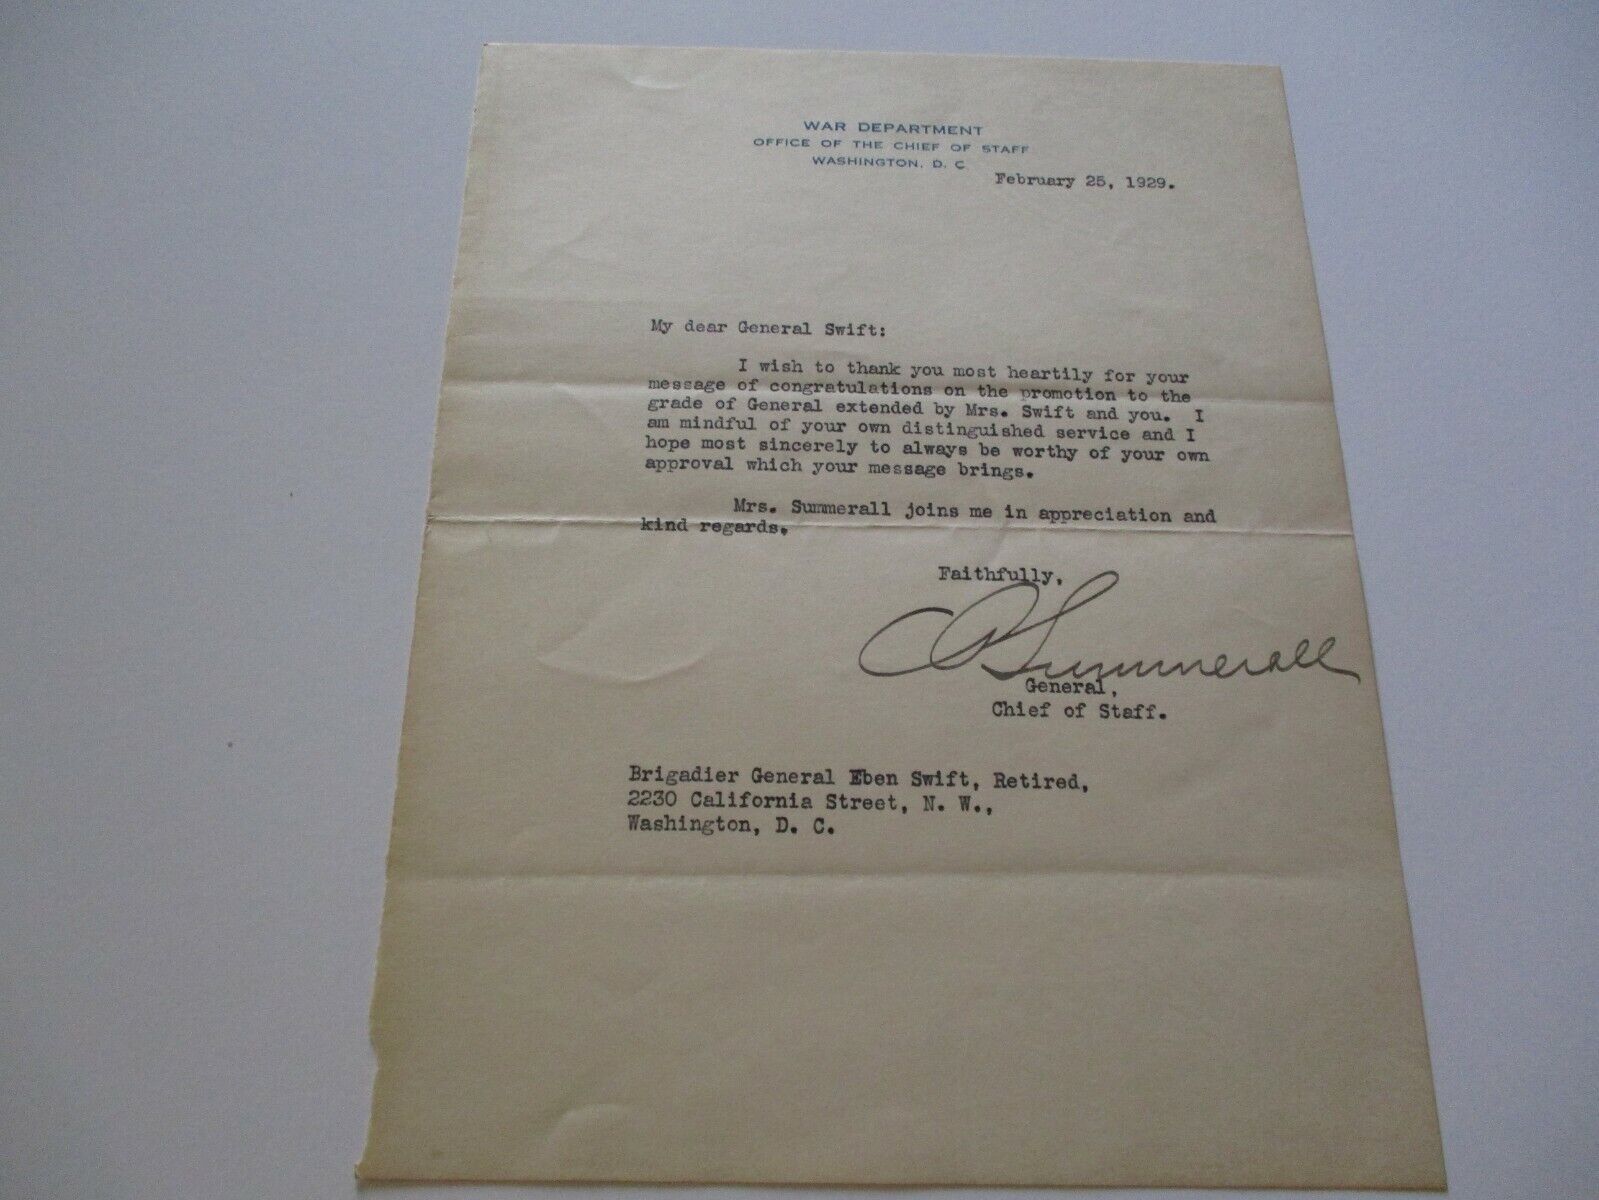  CHARLES PELOT SUMMERALL SIGNED LETTER AUTOGRAPH AMERICAN ARMY OFFICER WW1 RARE